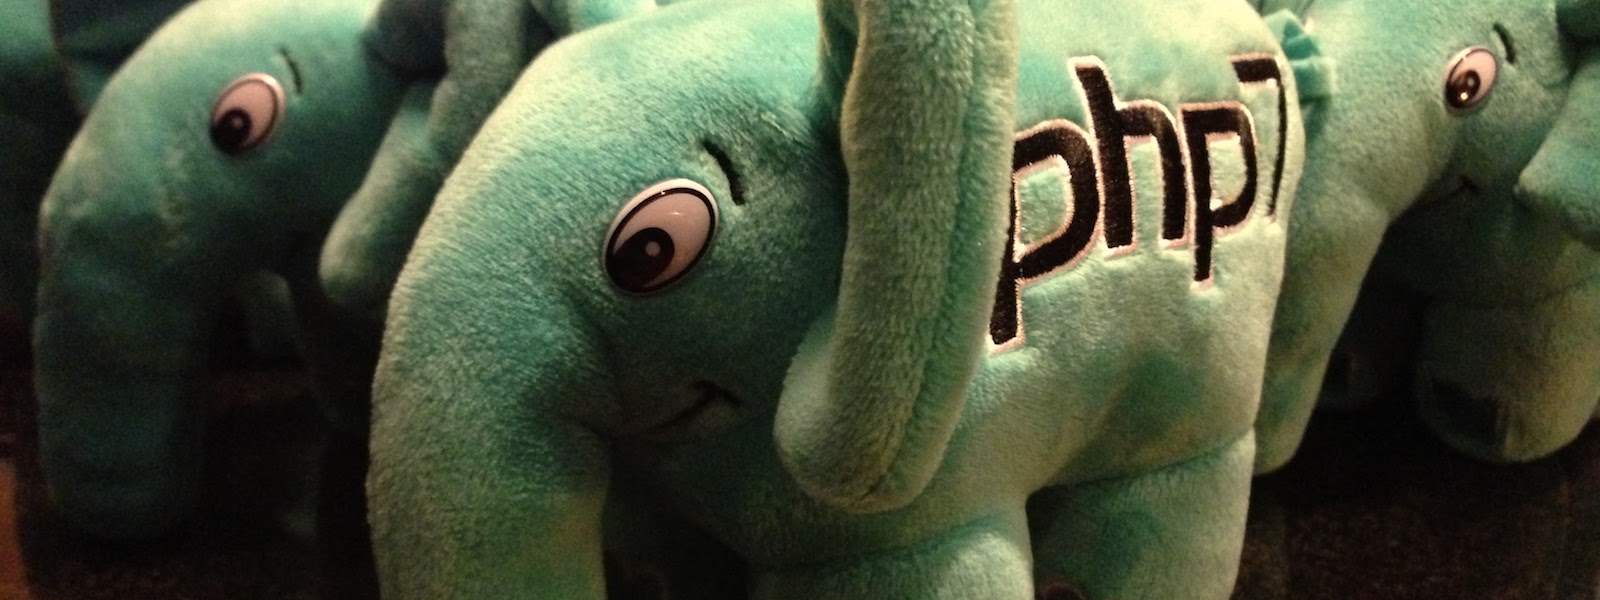 php7 elephpant